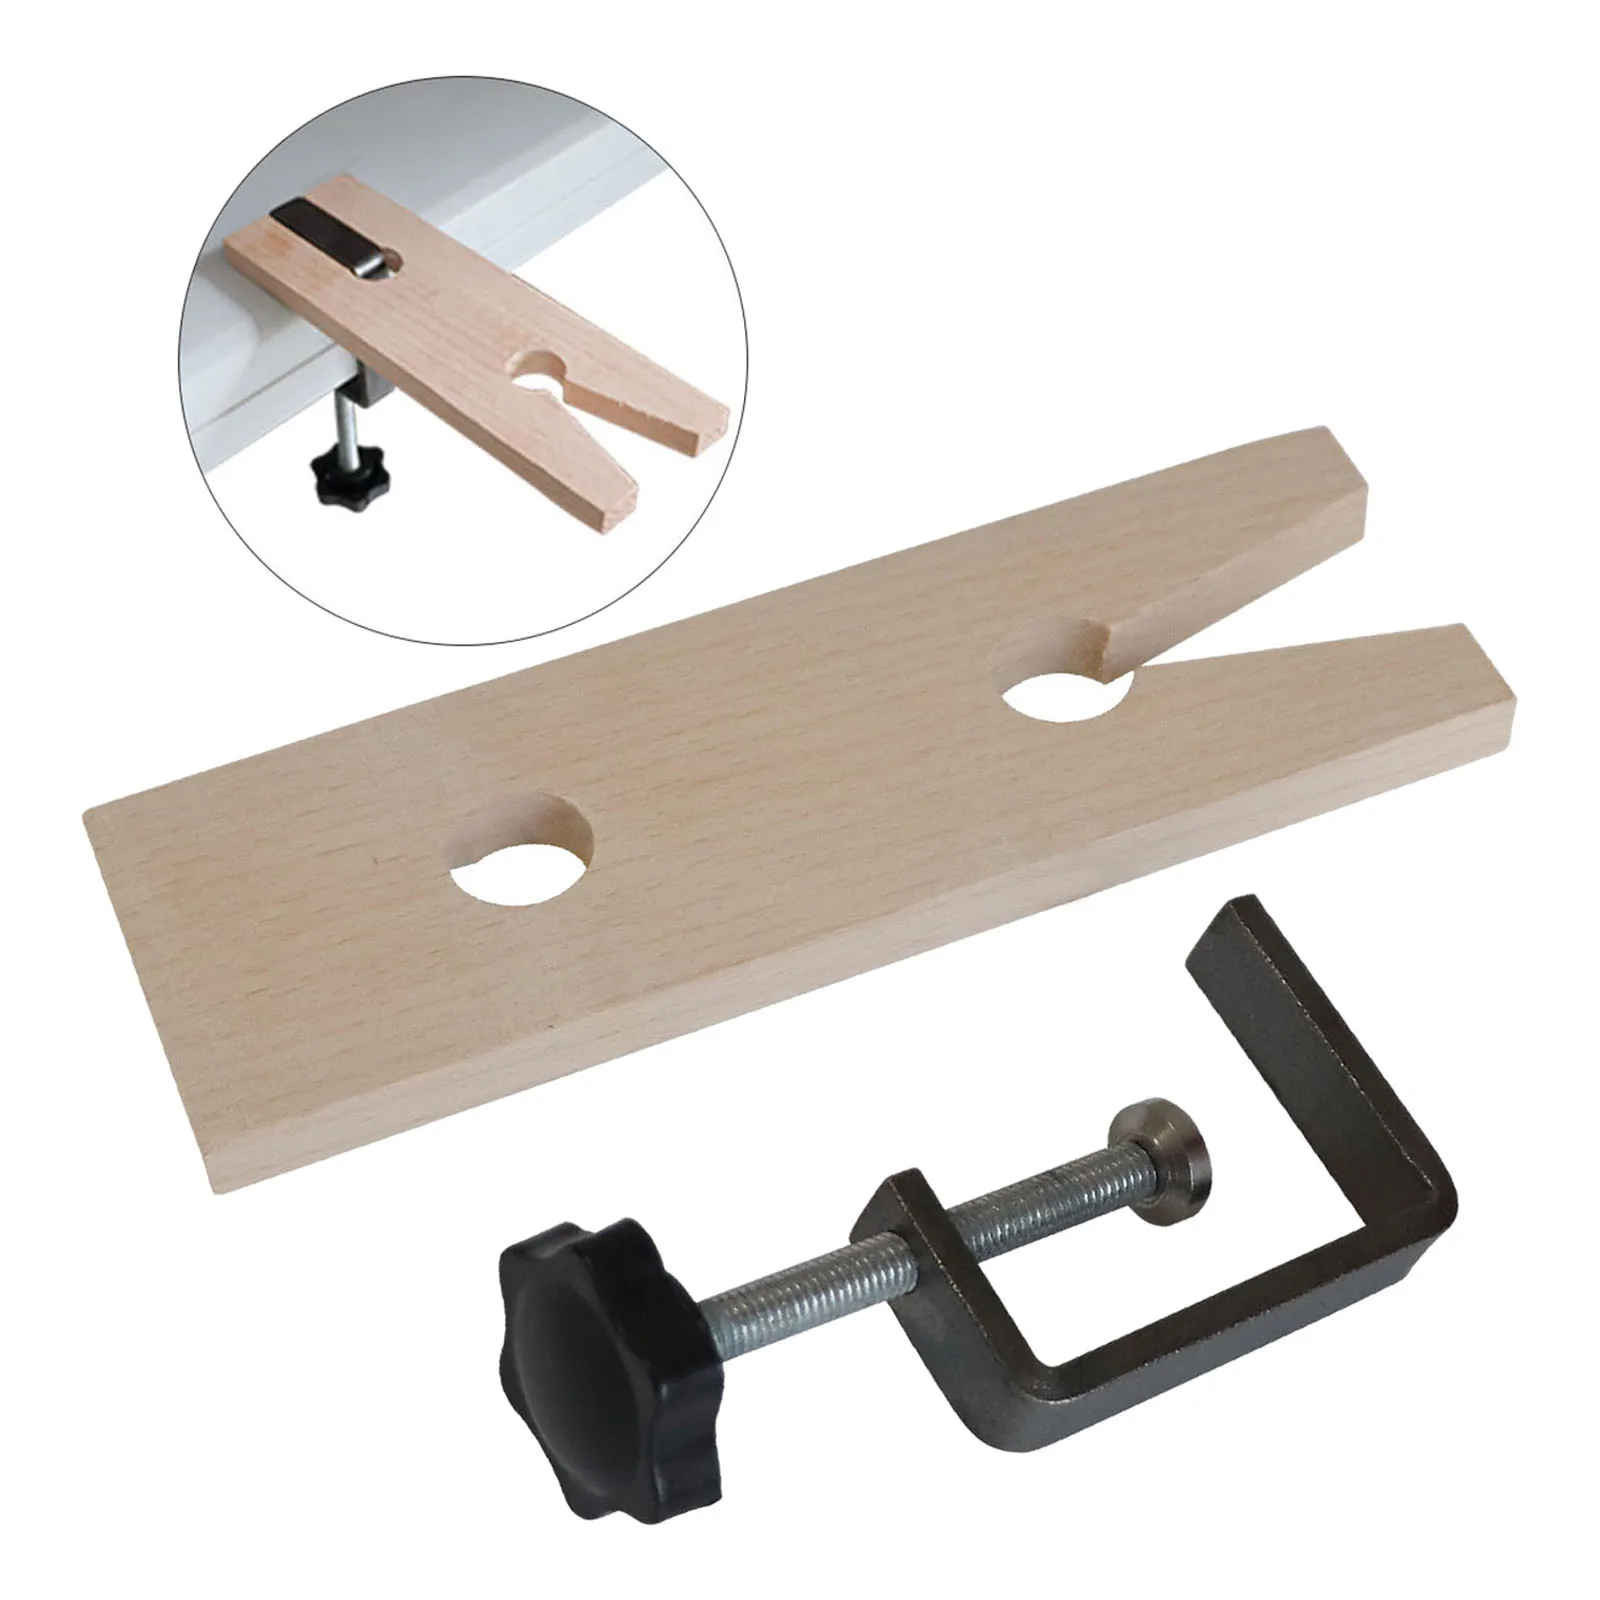 Bench Pin Clamp Hardwood Jewellers Watch Repair Jewelry Making V Slot Clip Tool Sawing Filing Finishing Holder